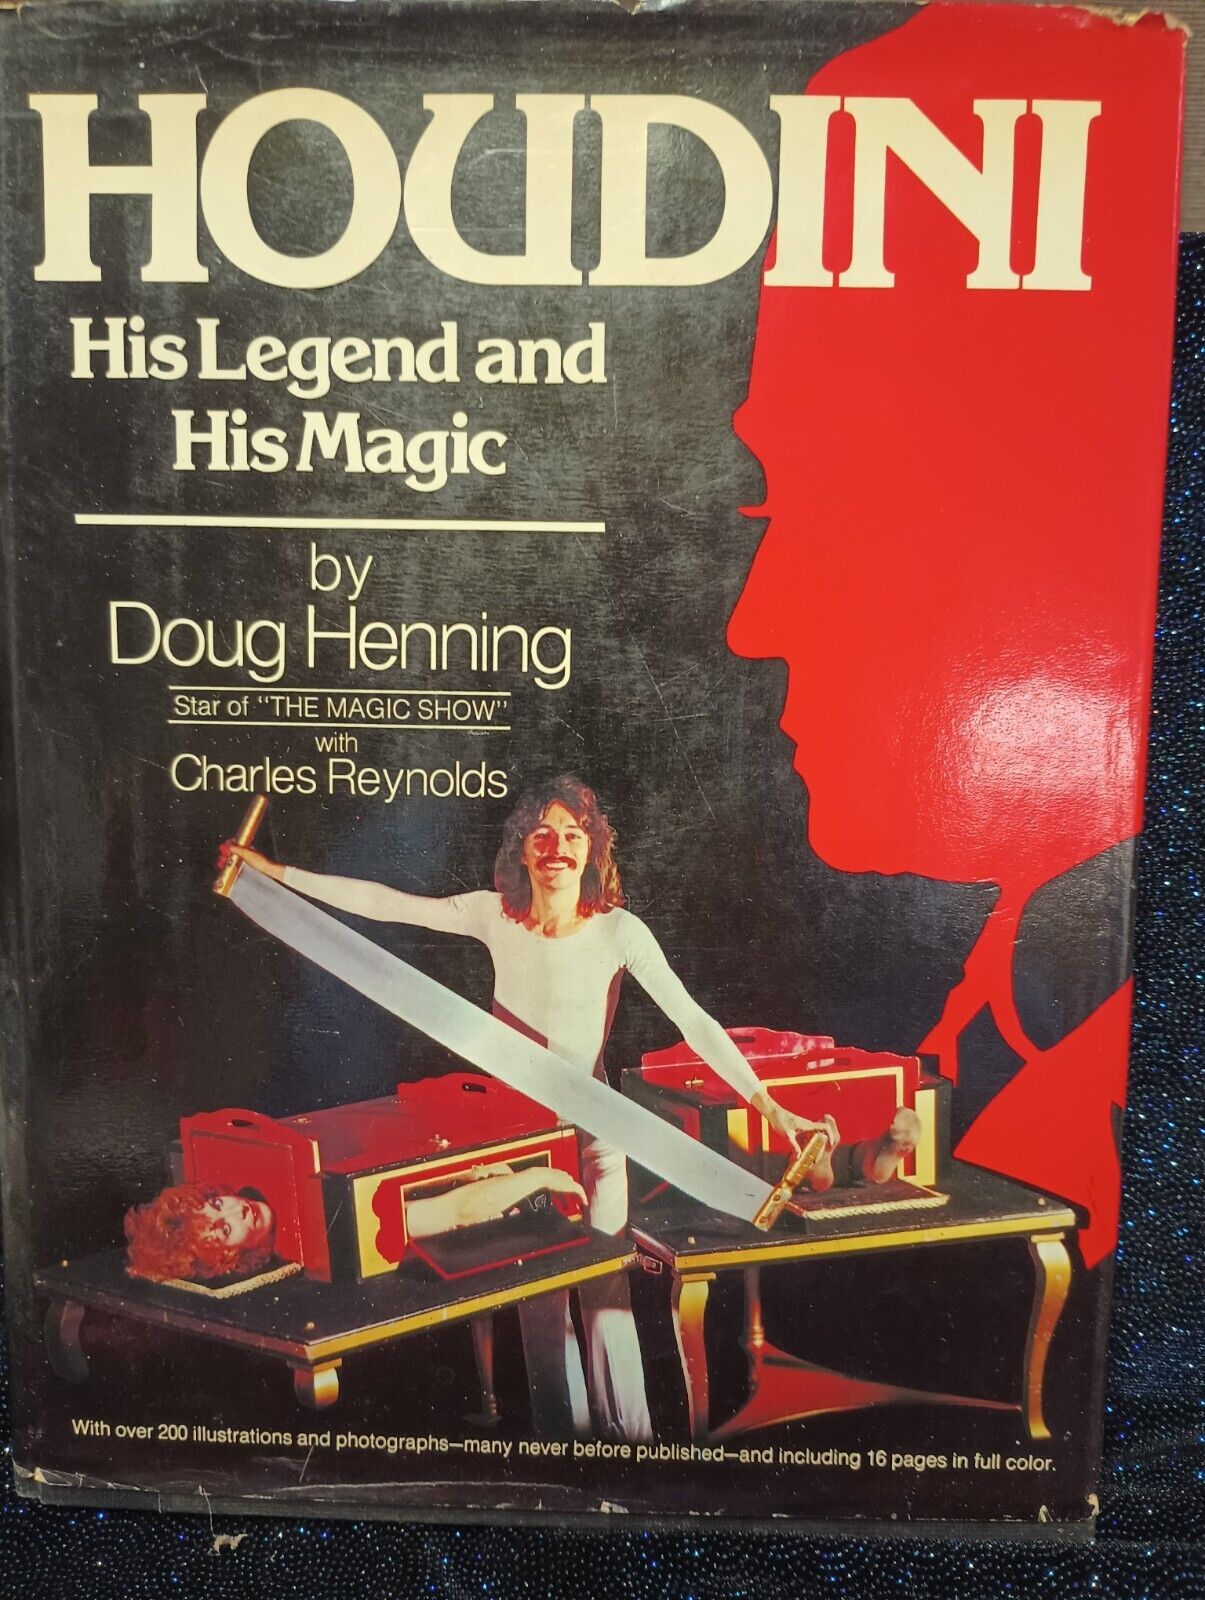 Houdini His Legend and His Magic by Doug Henning Hardcover DJ 1st Edition Book